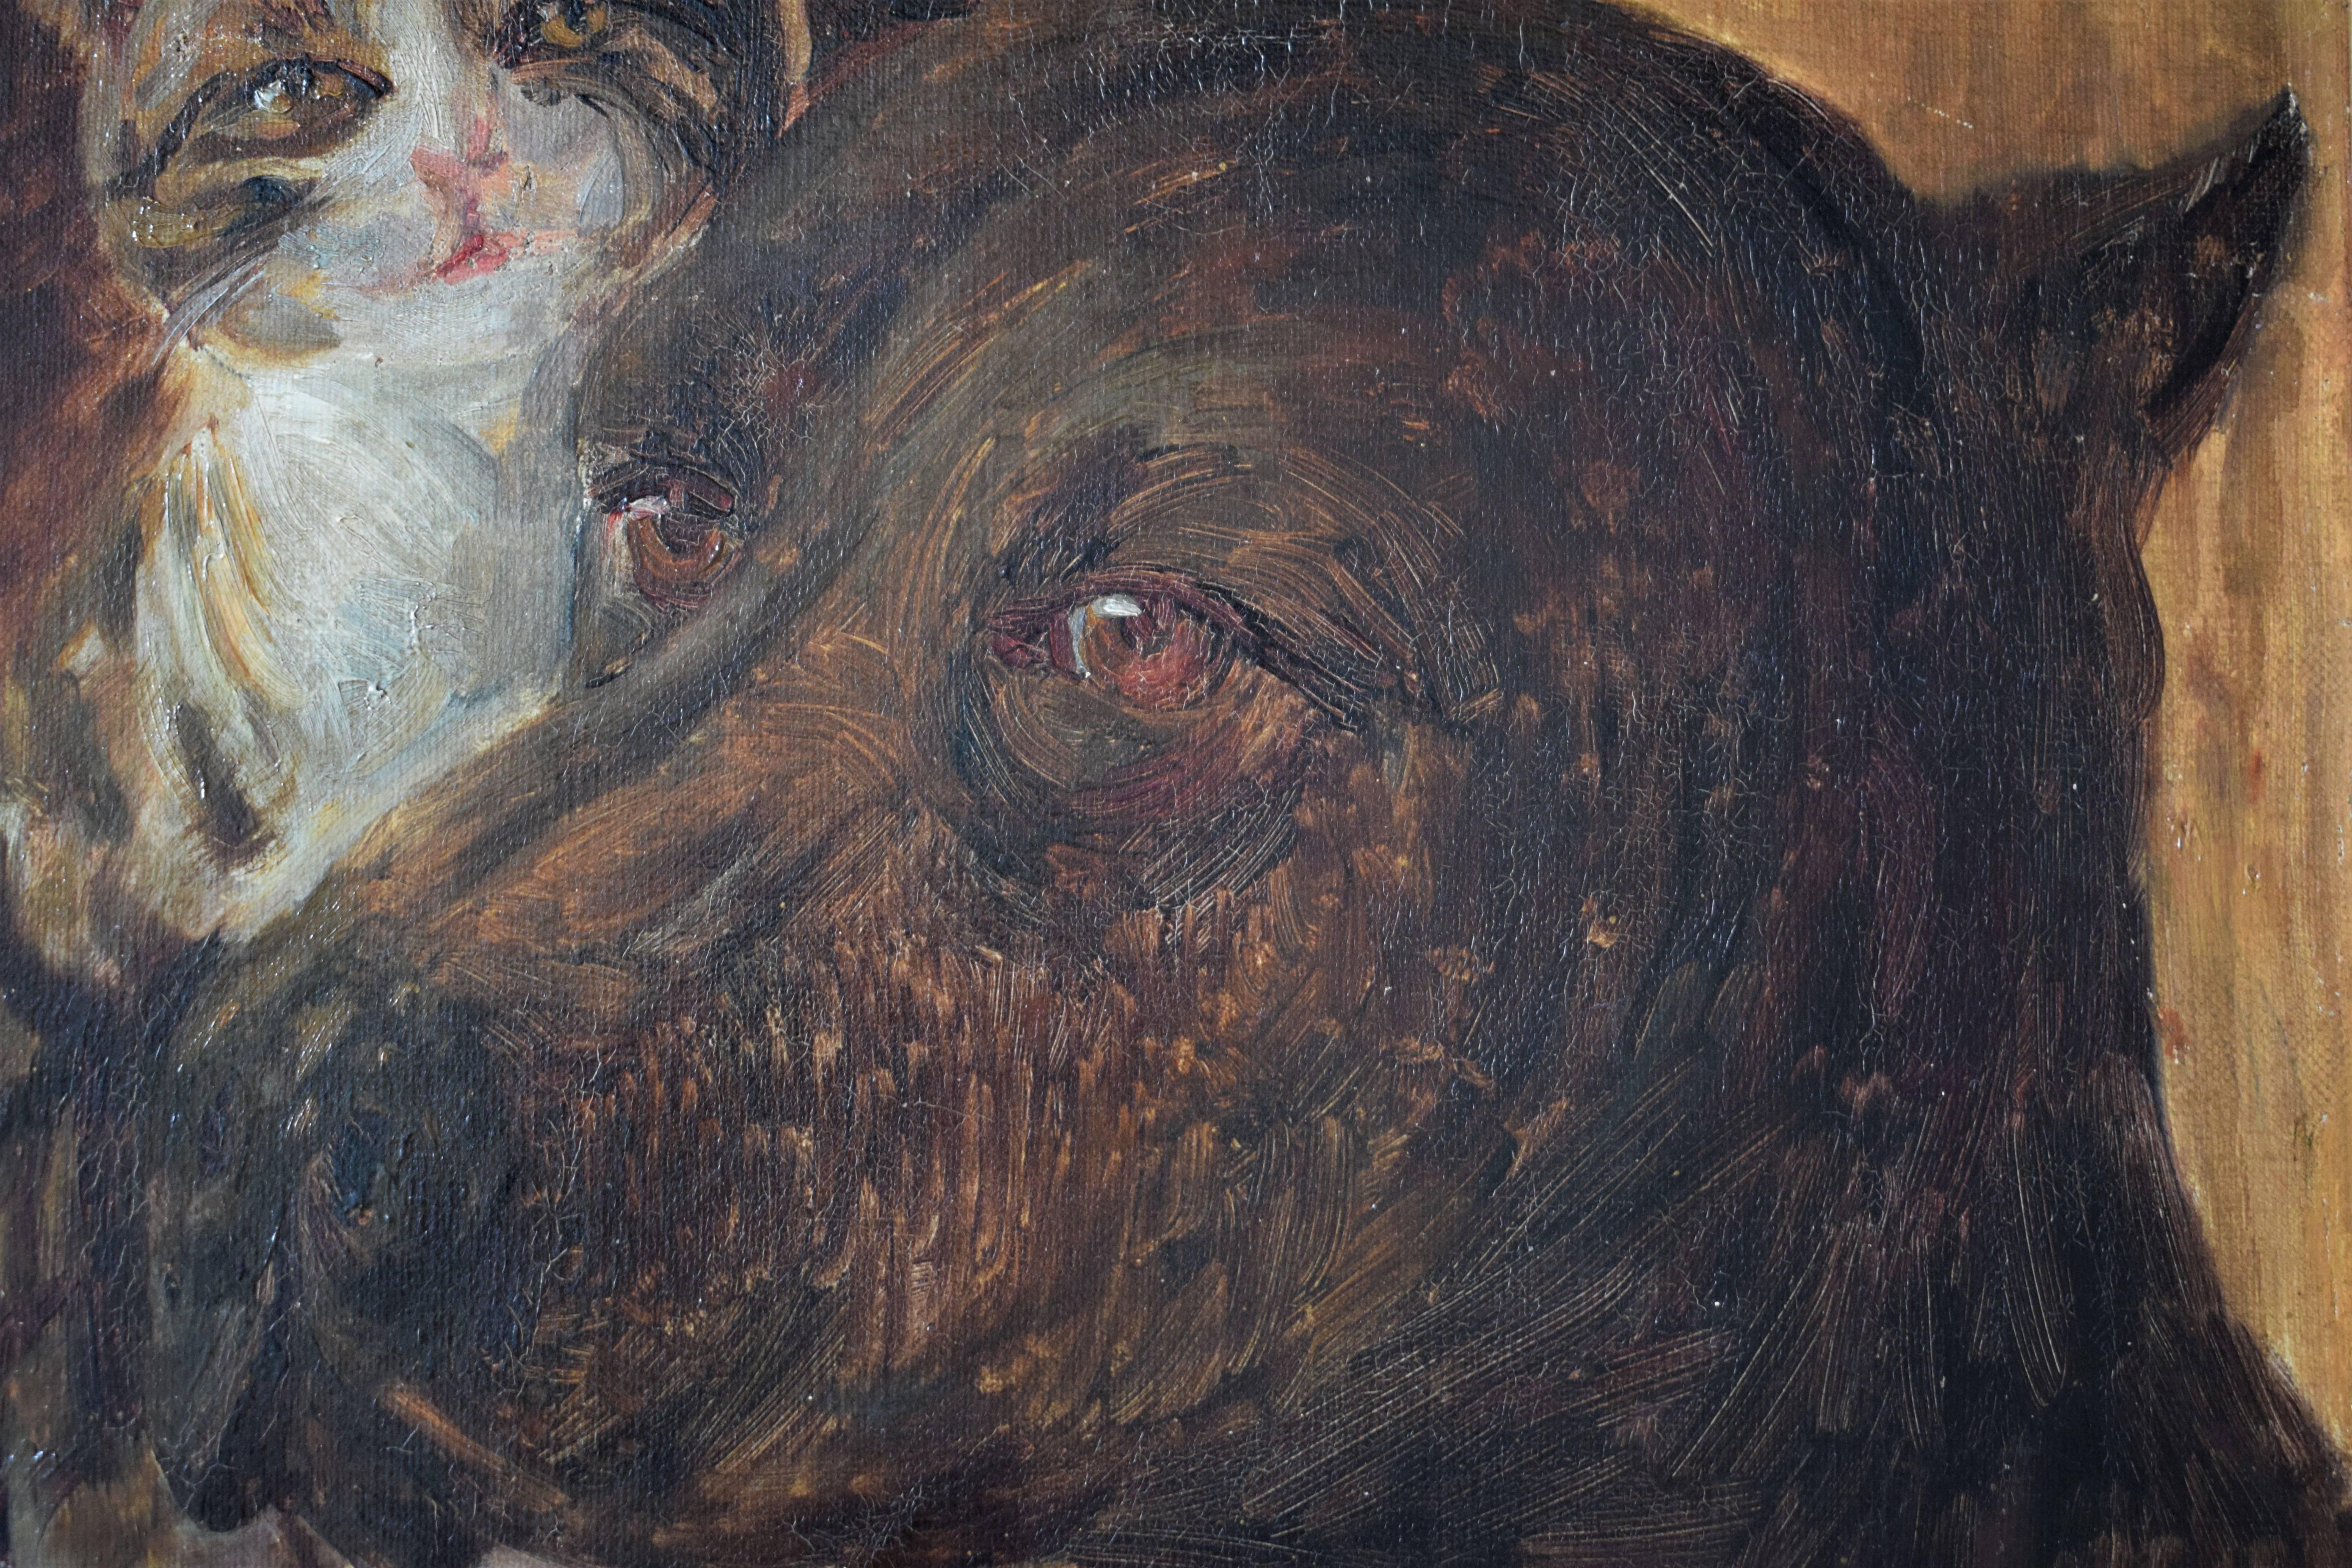 Other Early 20th Century Oil Painting of Dog and Cat by Carl Carlsen